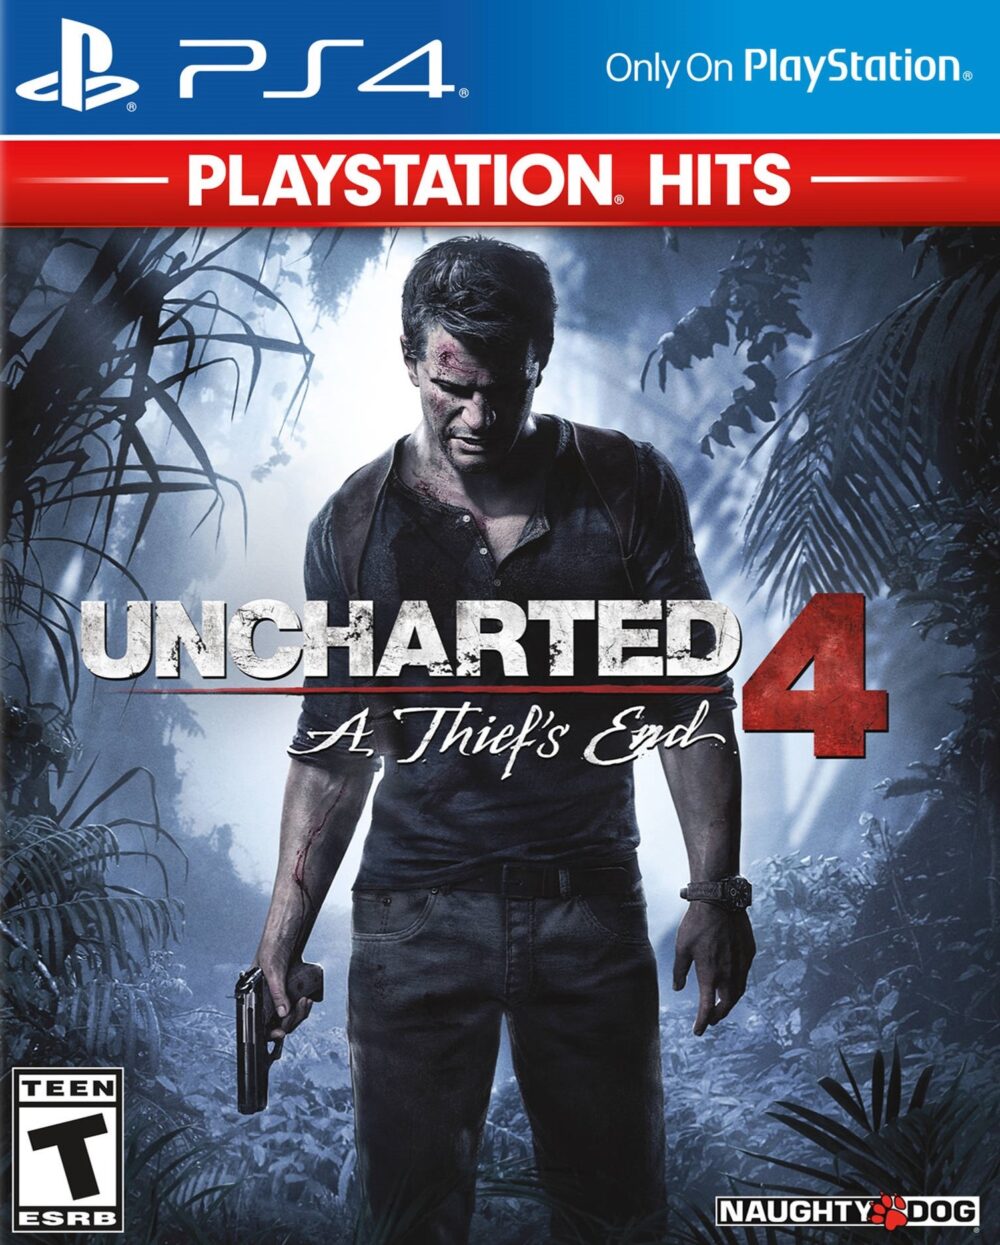 Uncharted 4: A Thief's End (PlayStation Hits) for PS4